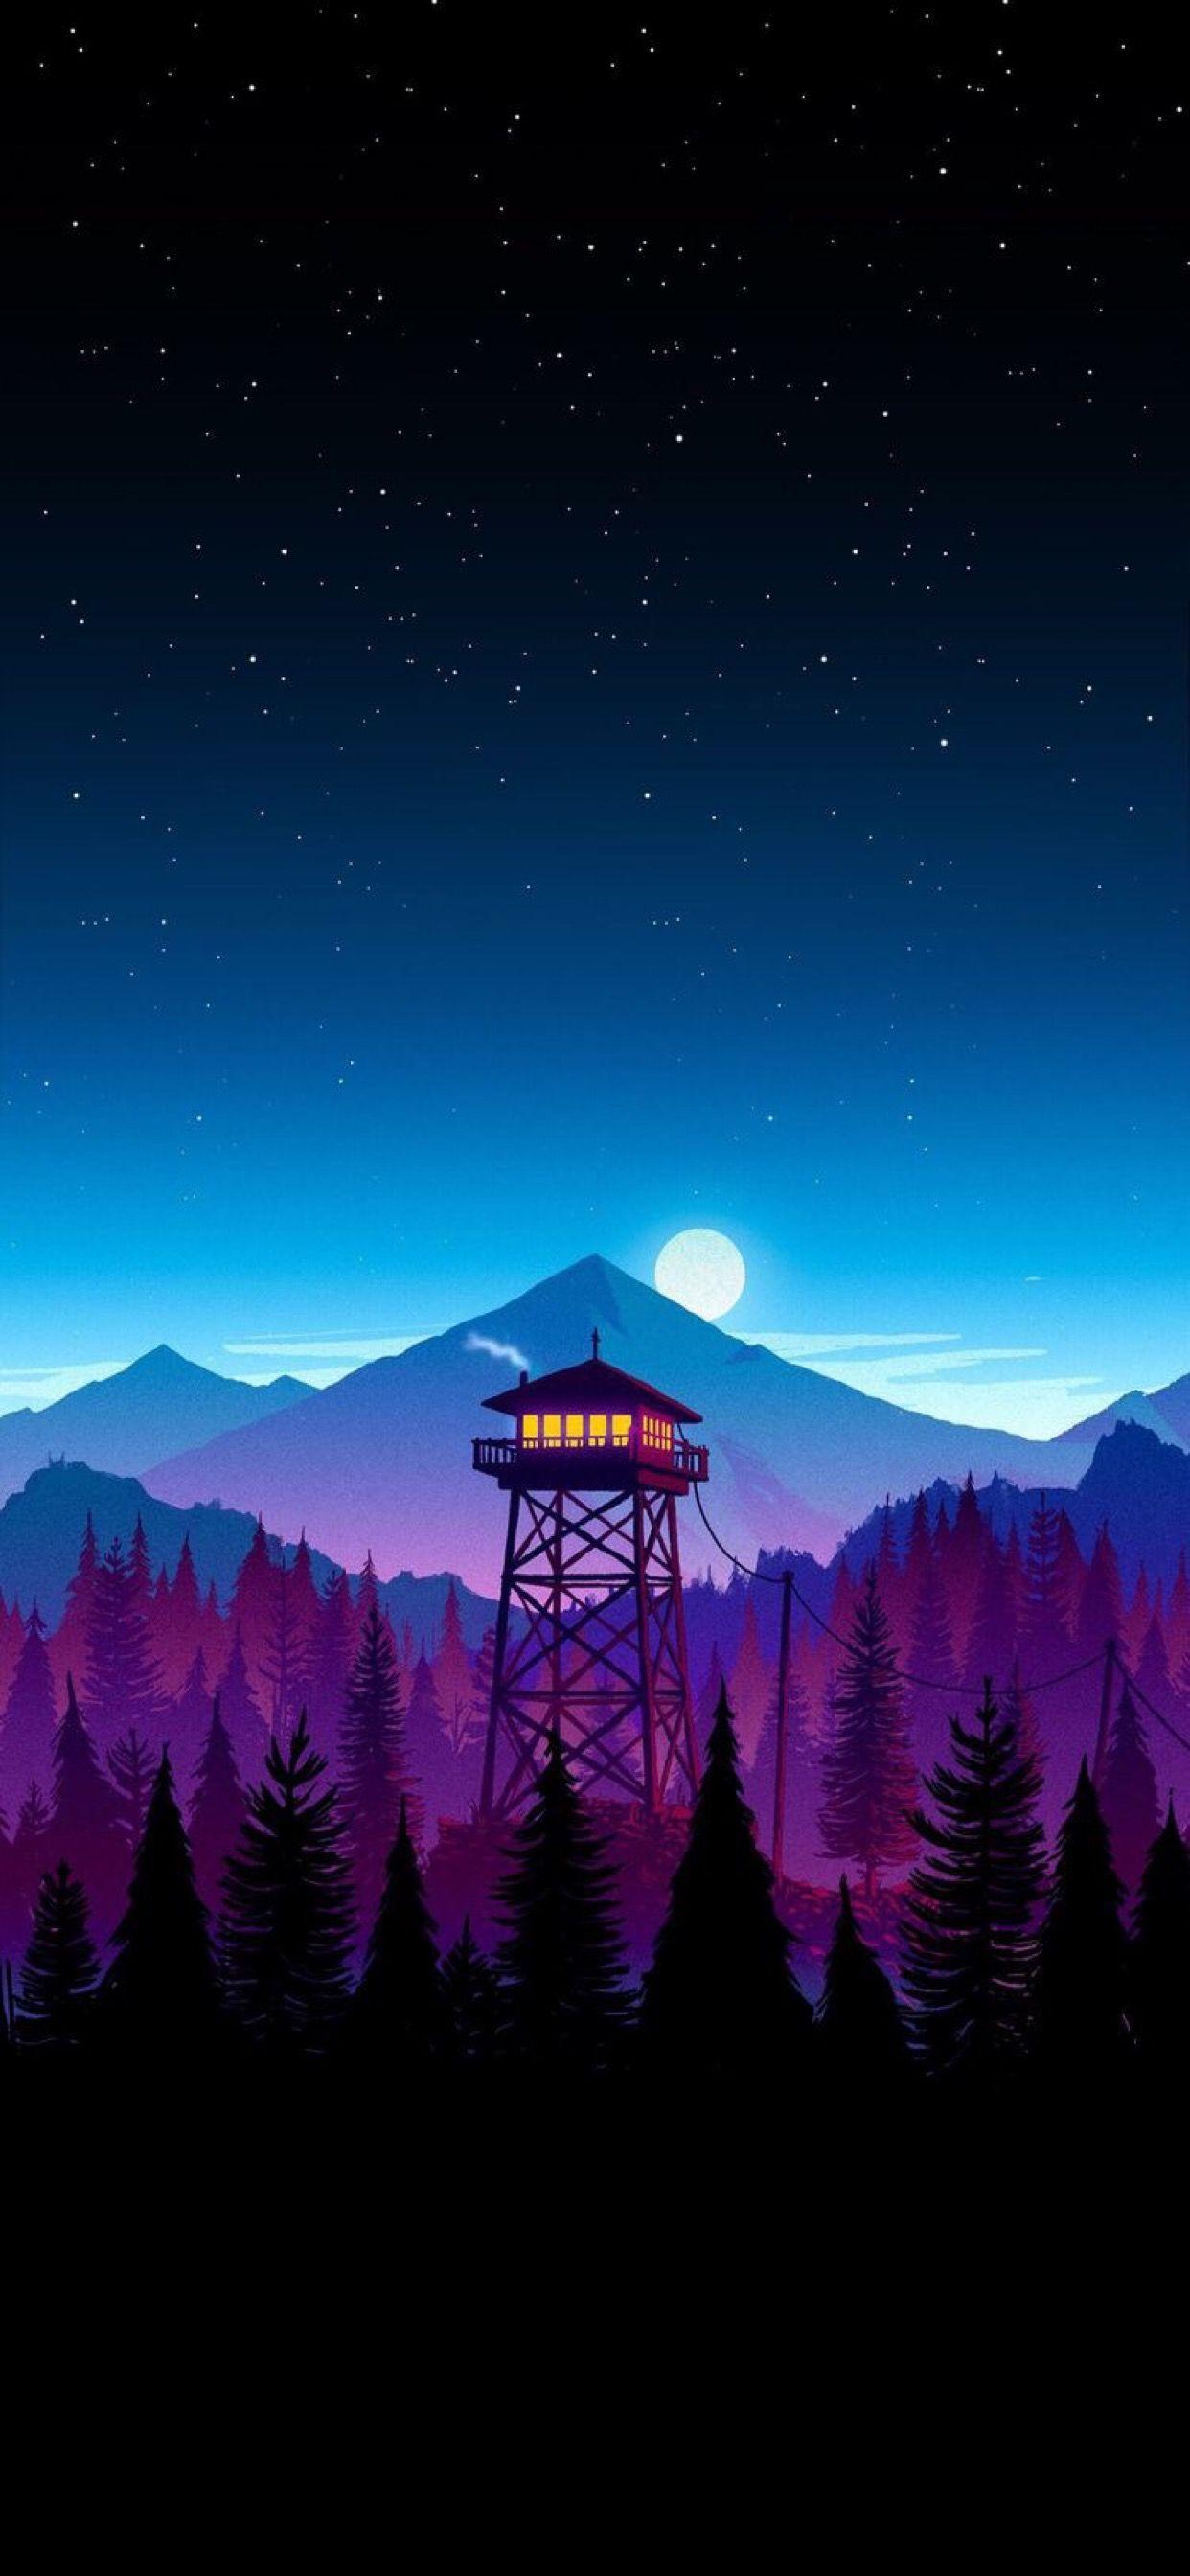 Forest Scenery Watchtower Firewatch Wallpaper iPhone Phone 4K #4260e